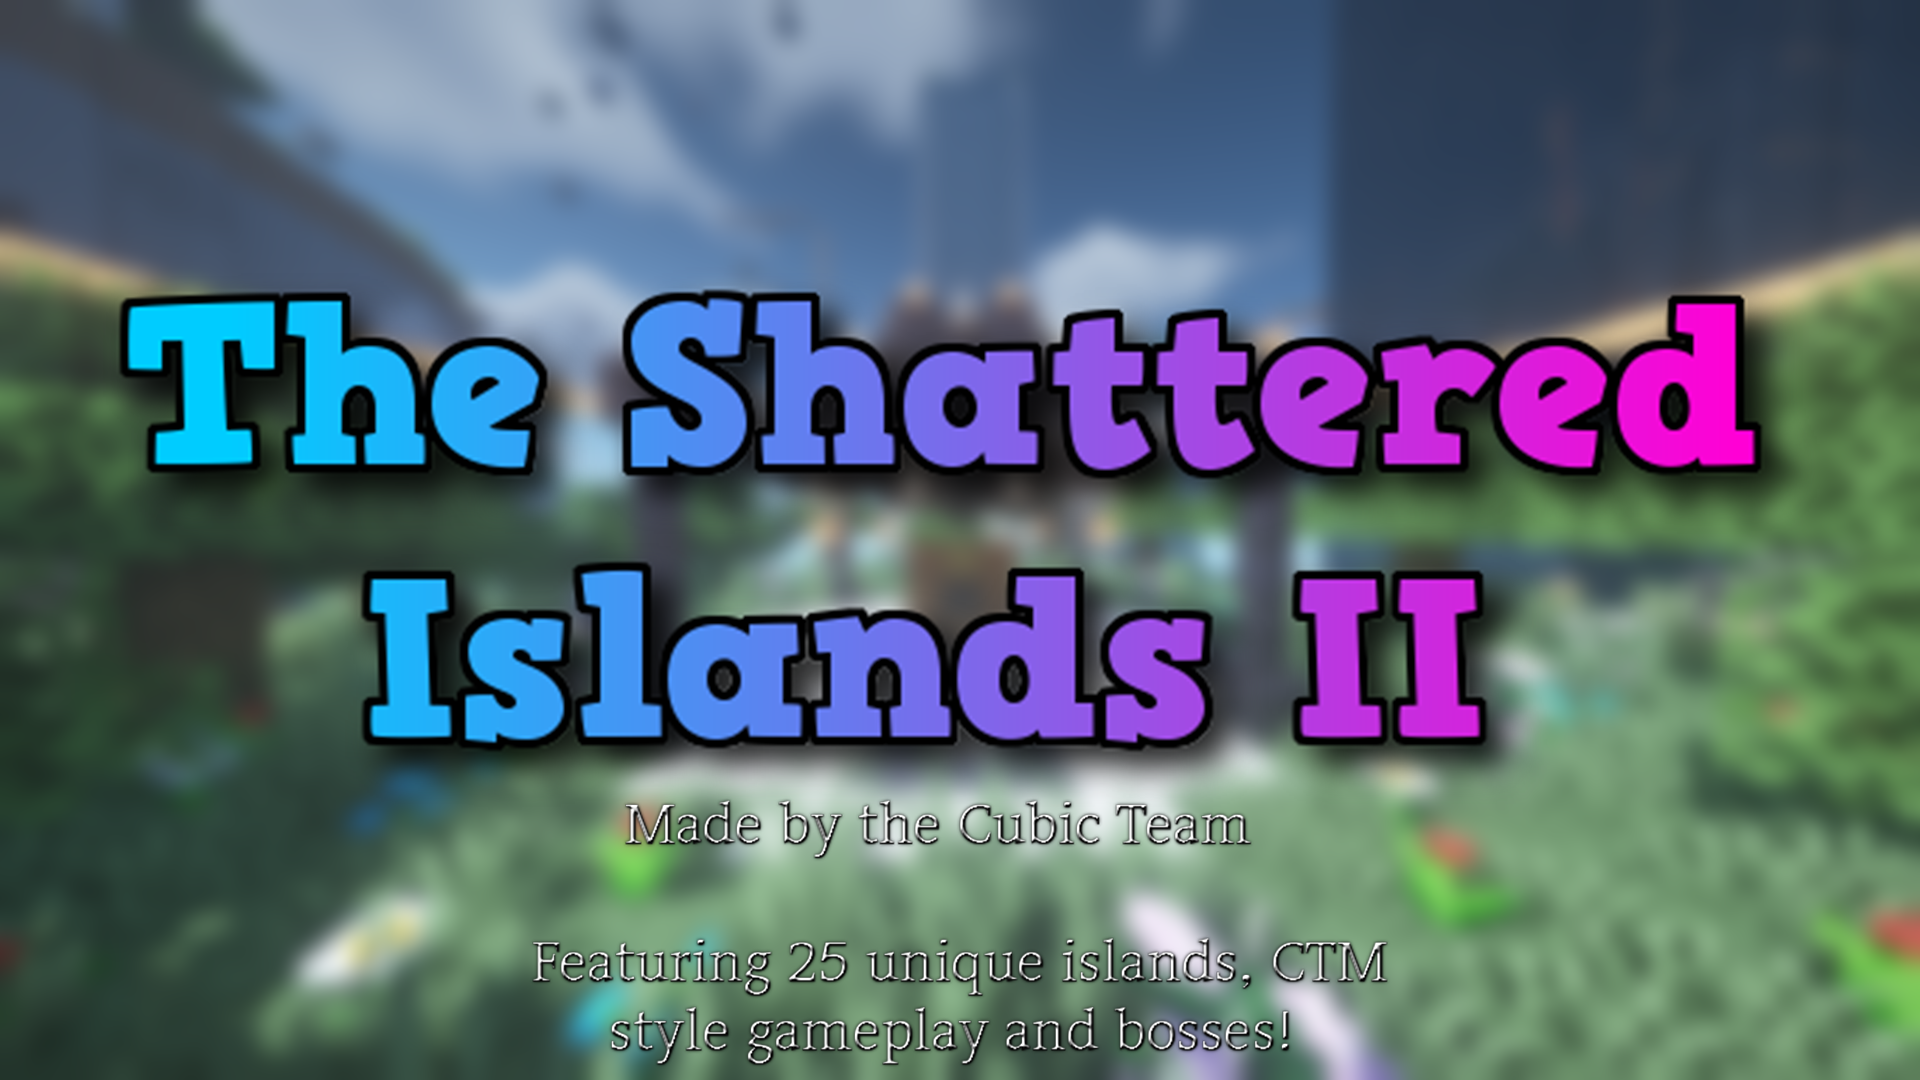 Télécharger The Shattered Islands II 1.02 pour Minecraft 1.19